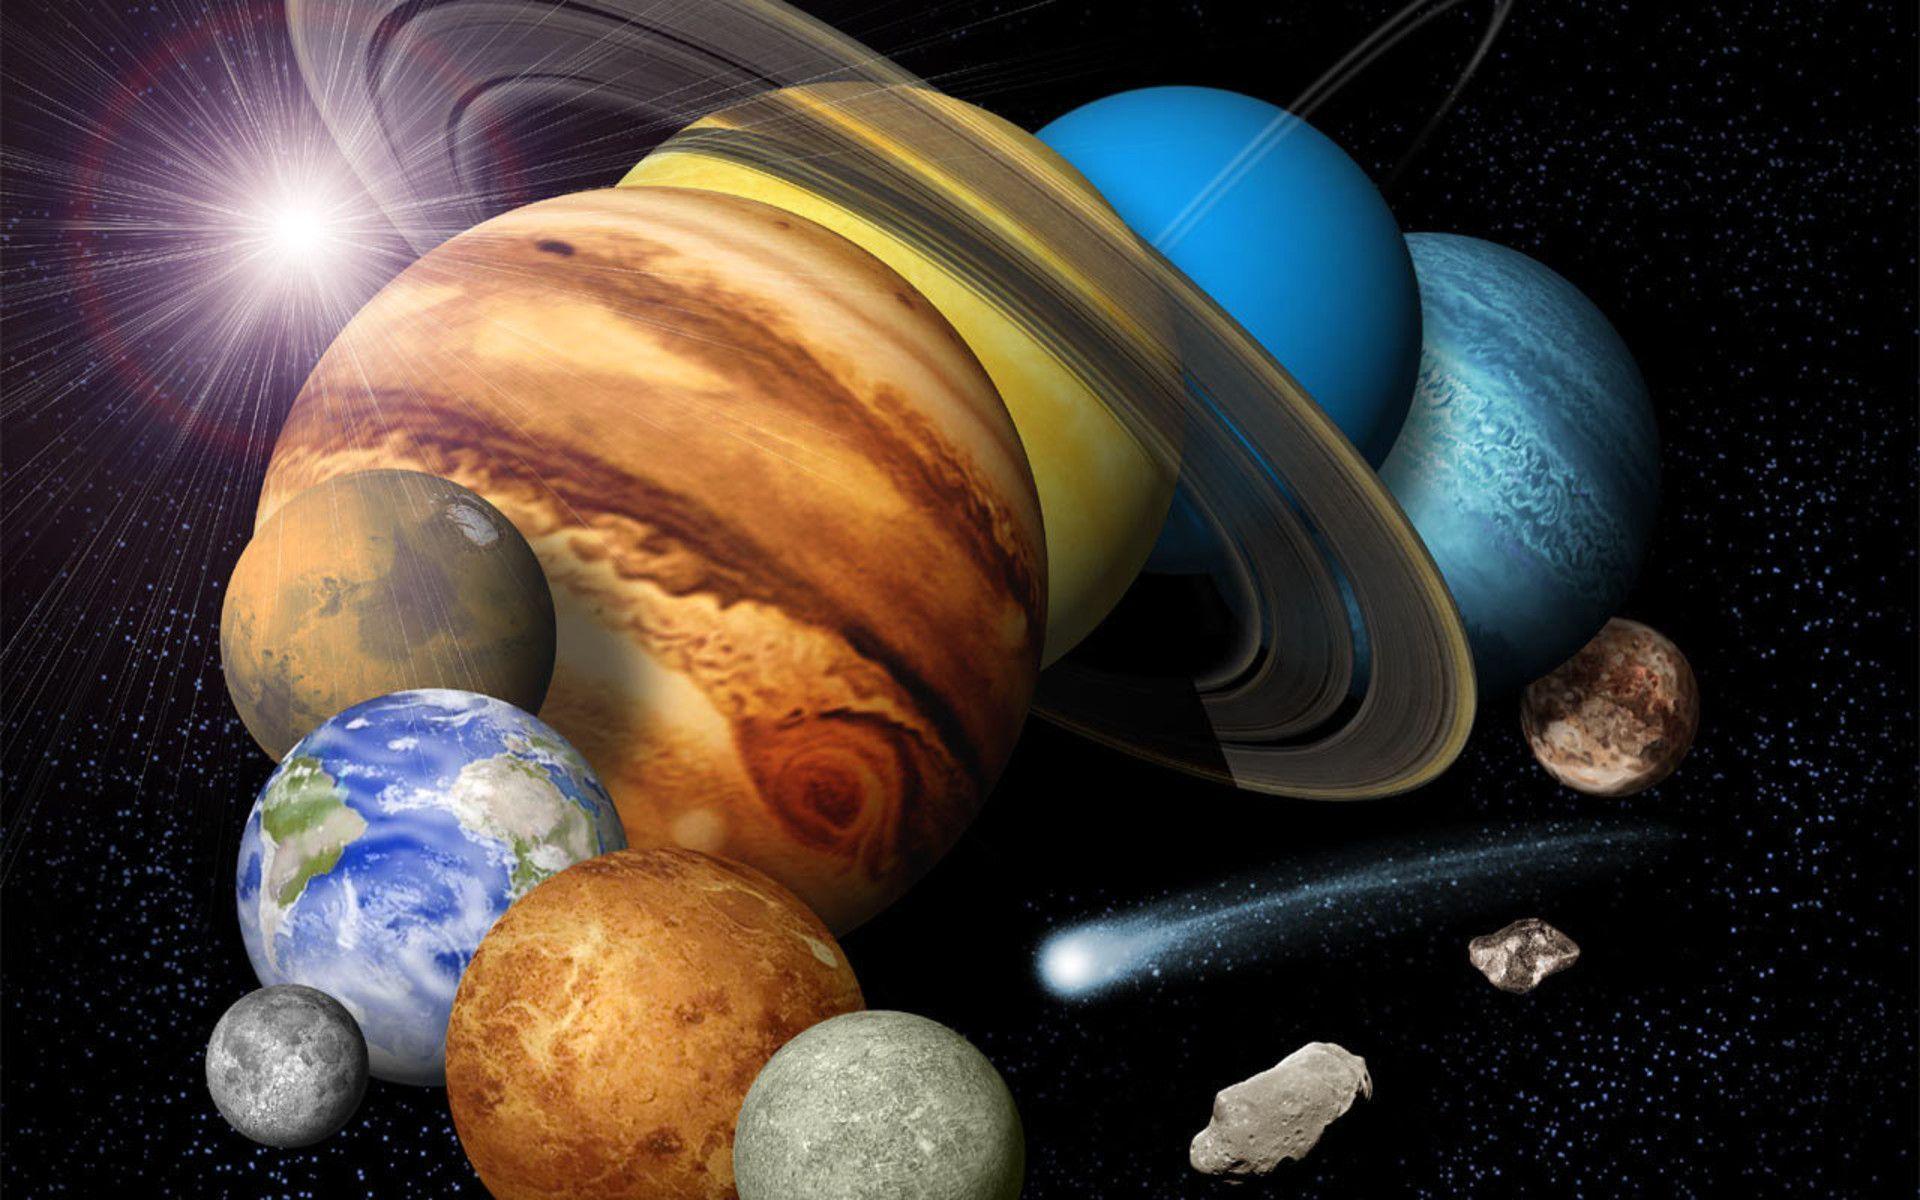 Solar system live wallpaper - Apps on Google Play